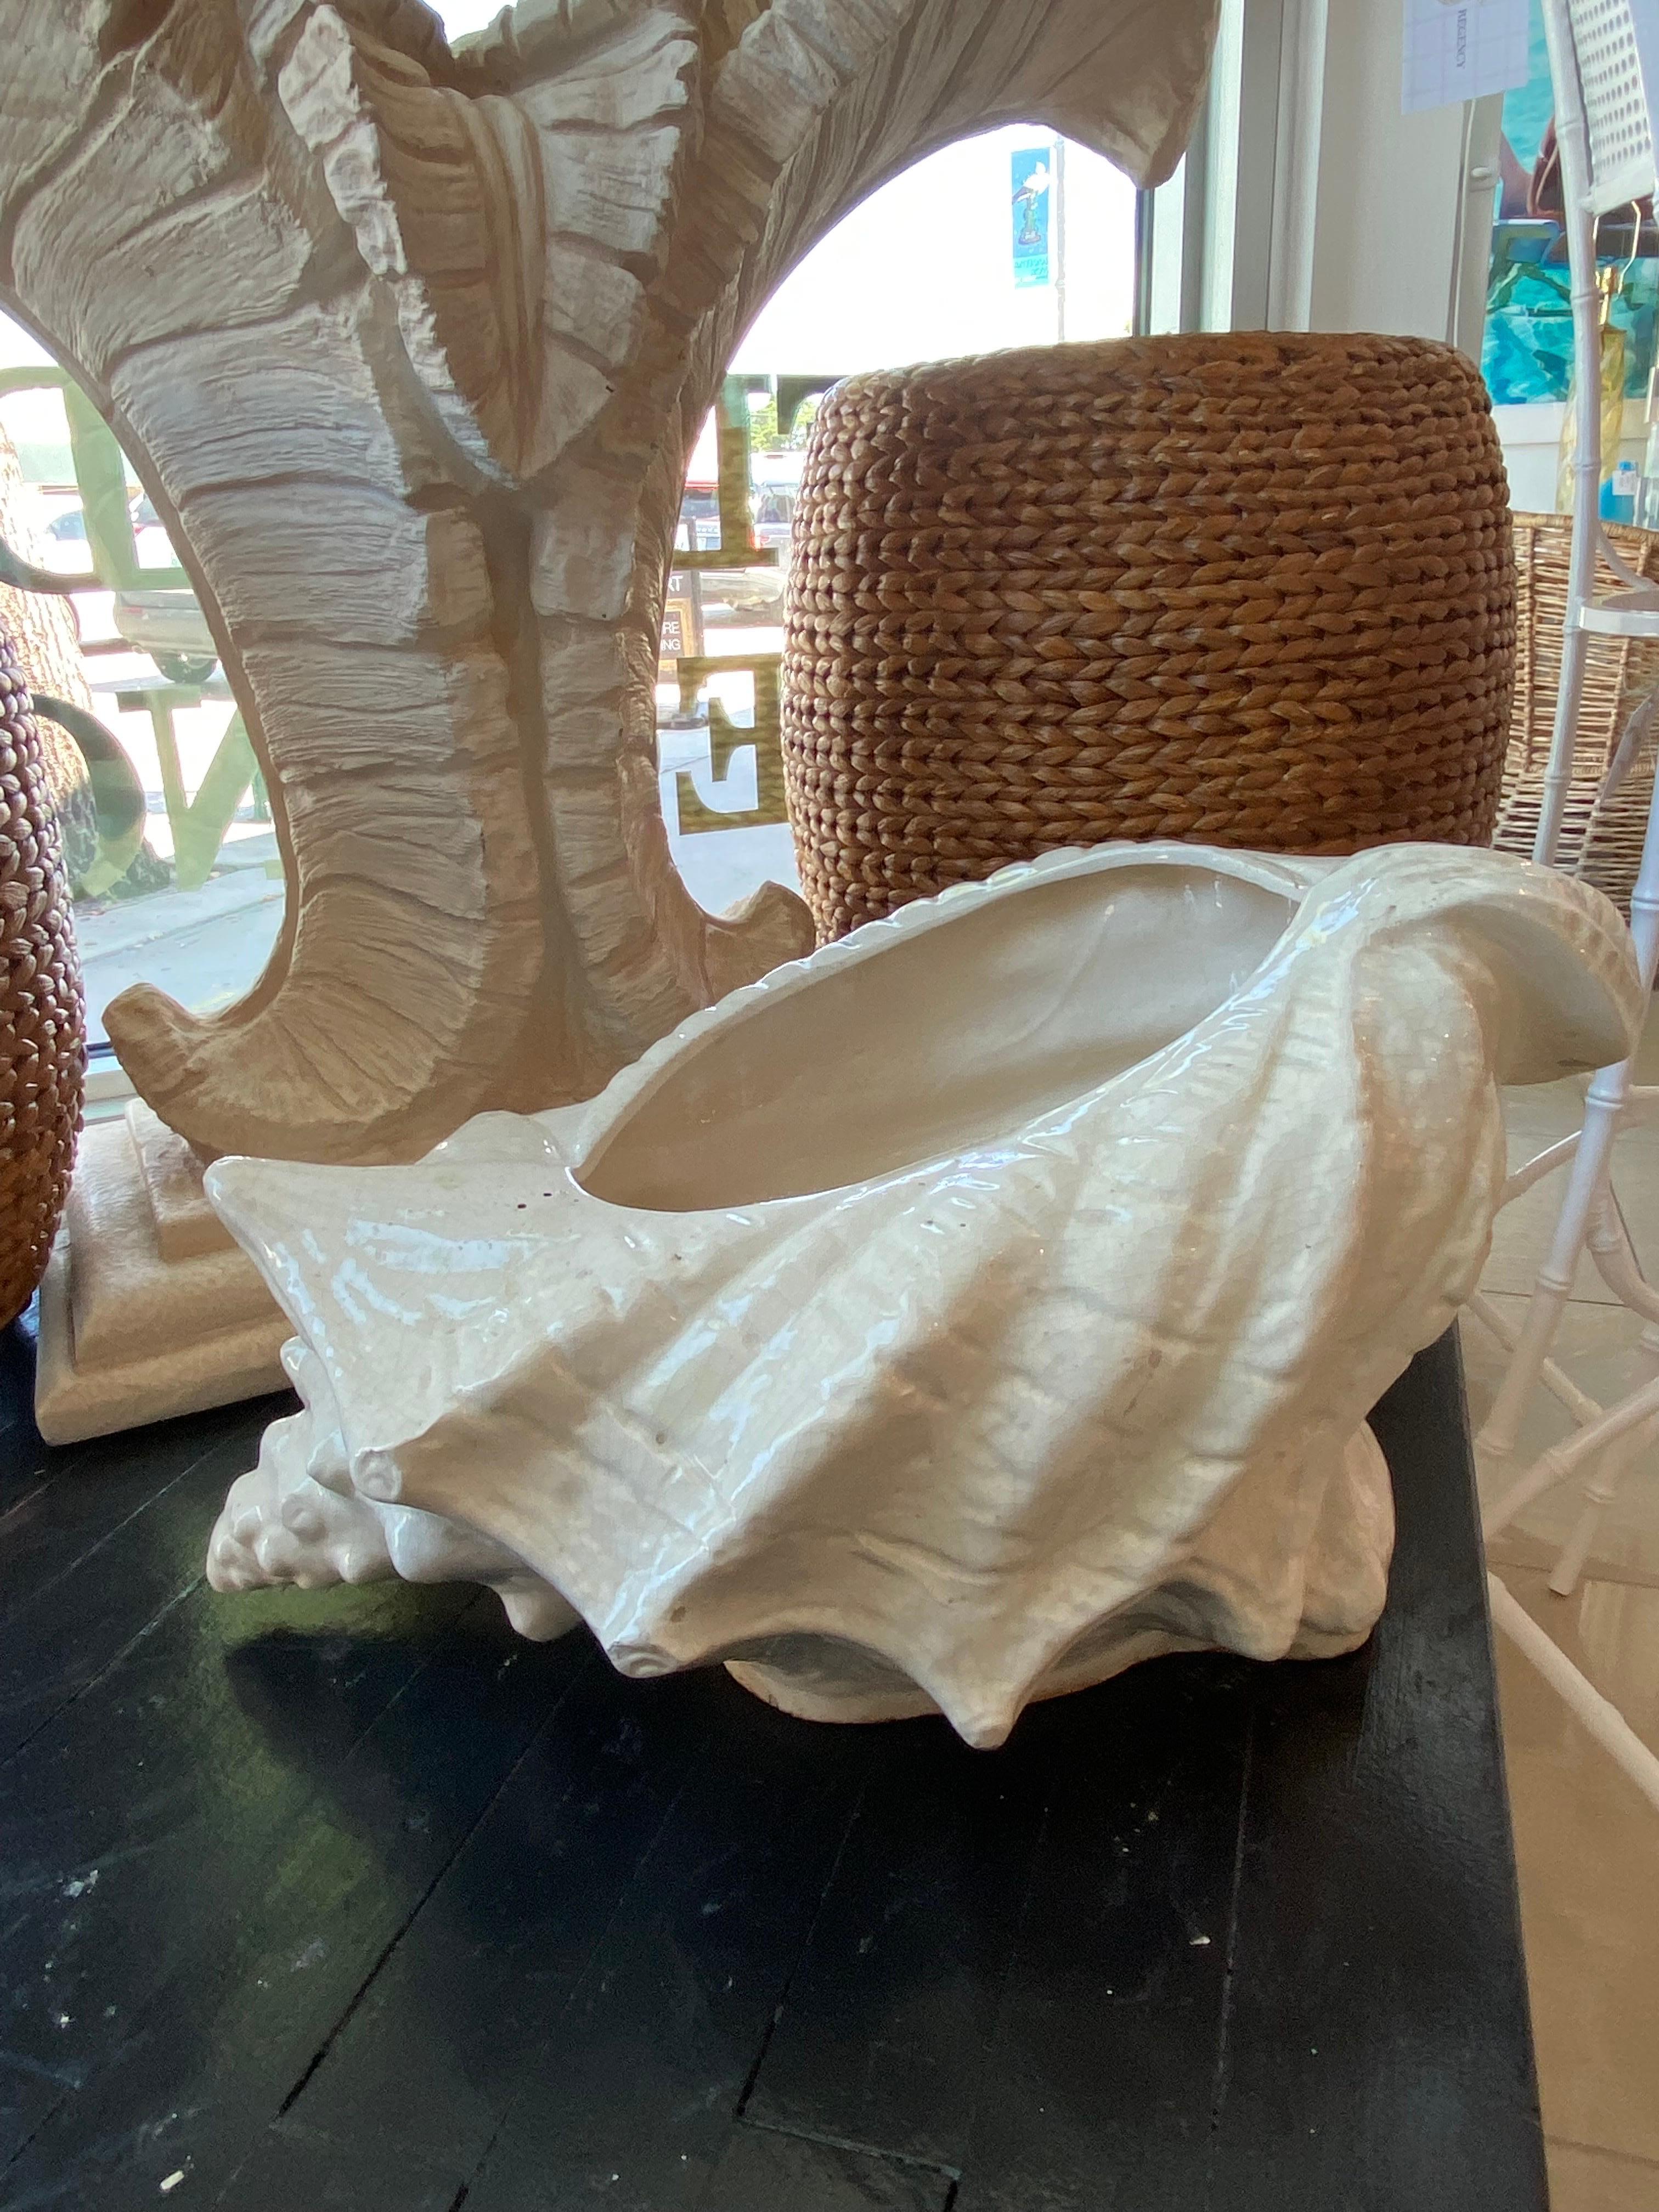 Vintage large oversized ceramic crackle seashell shell planter. Drainage hole inside. Dimensions: 10 H x 12 D x 22 W.